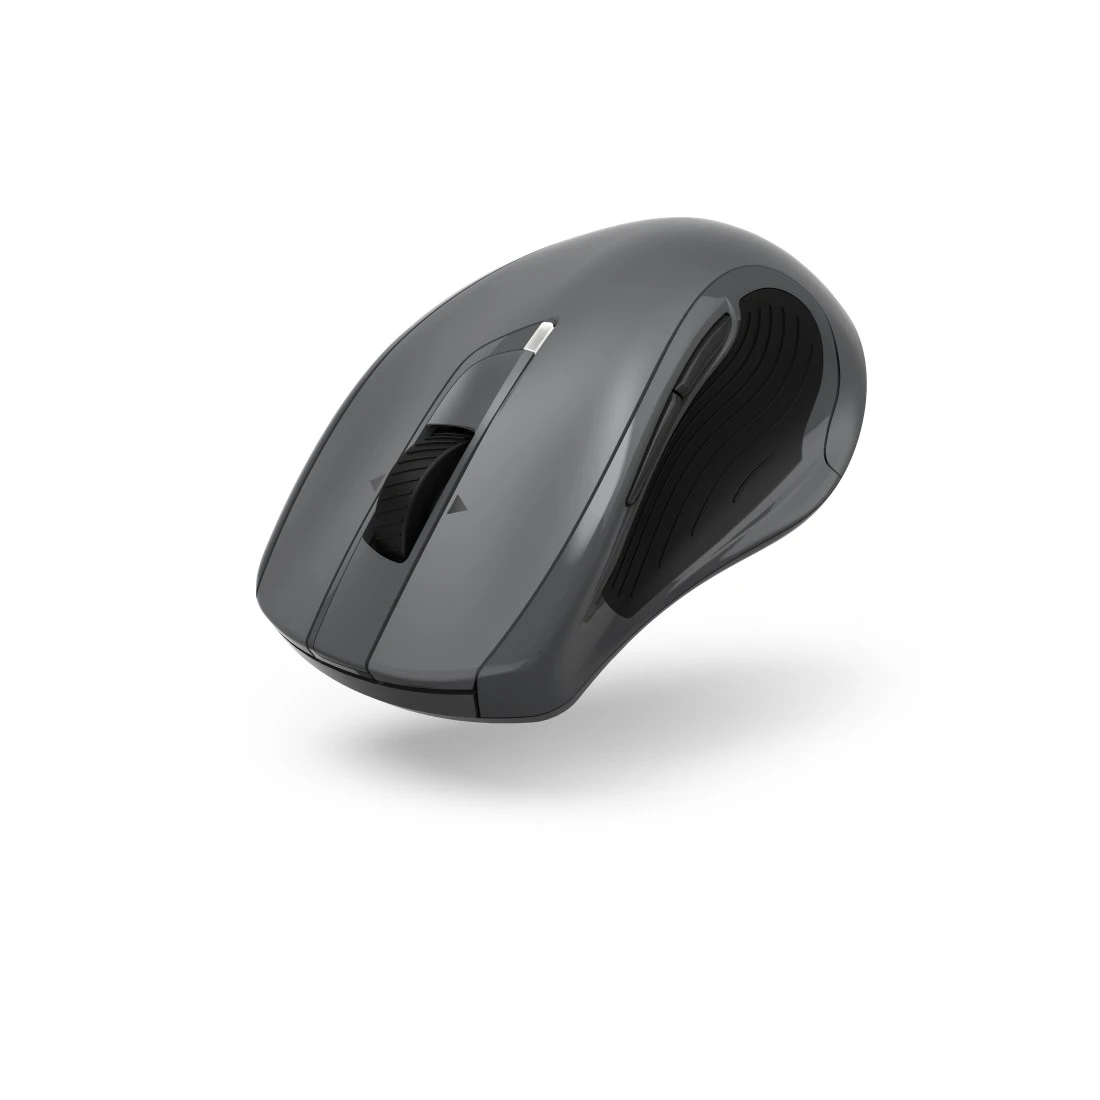 You Recently Viewed Hama 00173011 MW-800 V2 7-Button Laser Wireless Mouse, dark grey Image